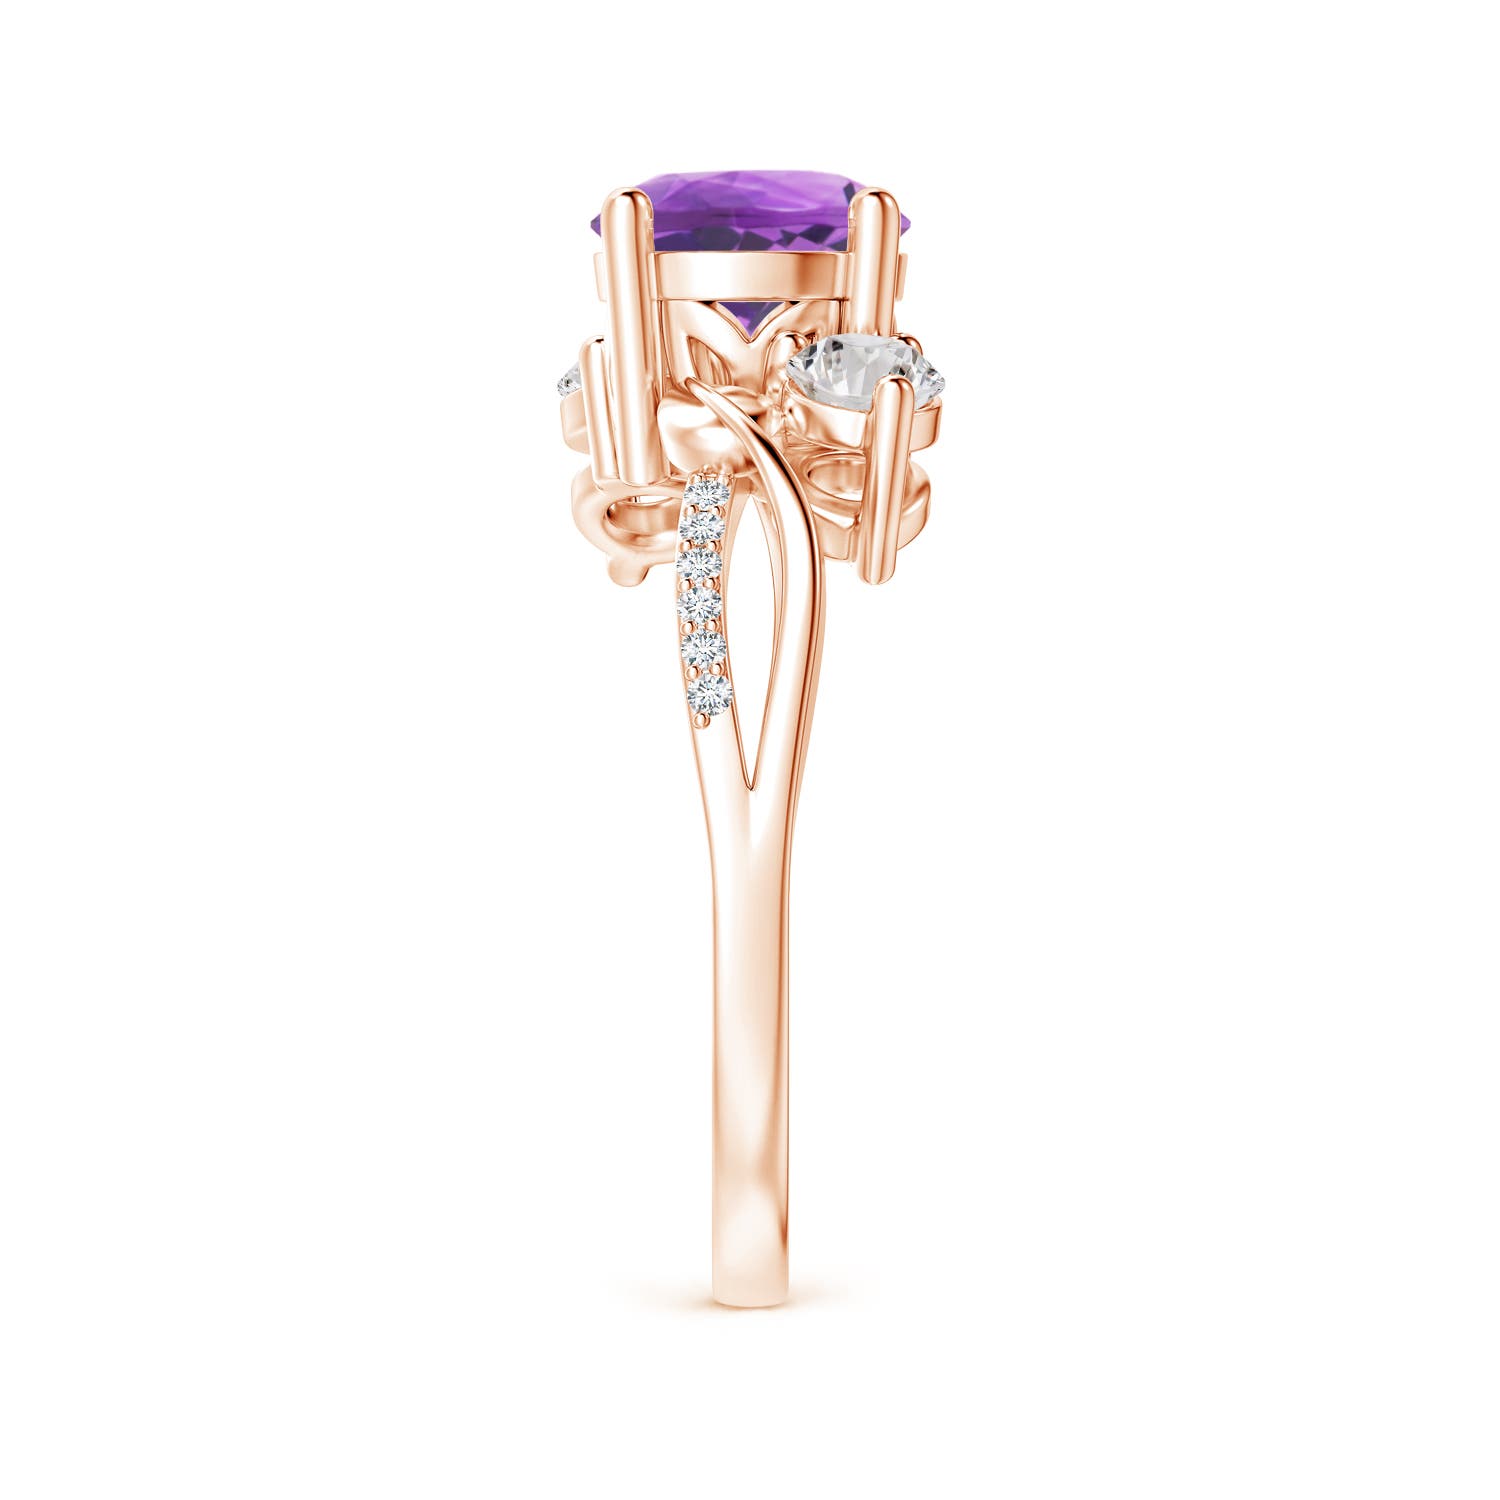 AA - Amethyst / 1.53 CT / 14 KT Rose Gold